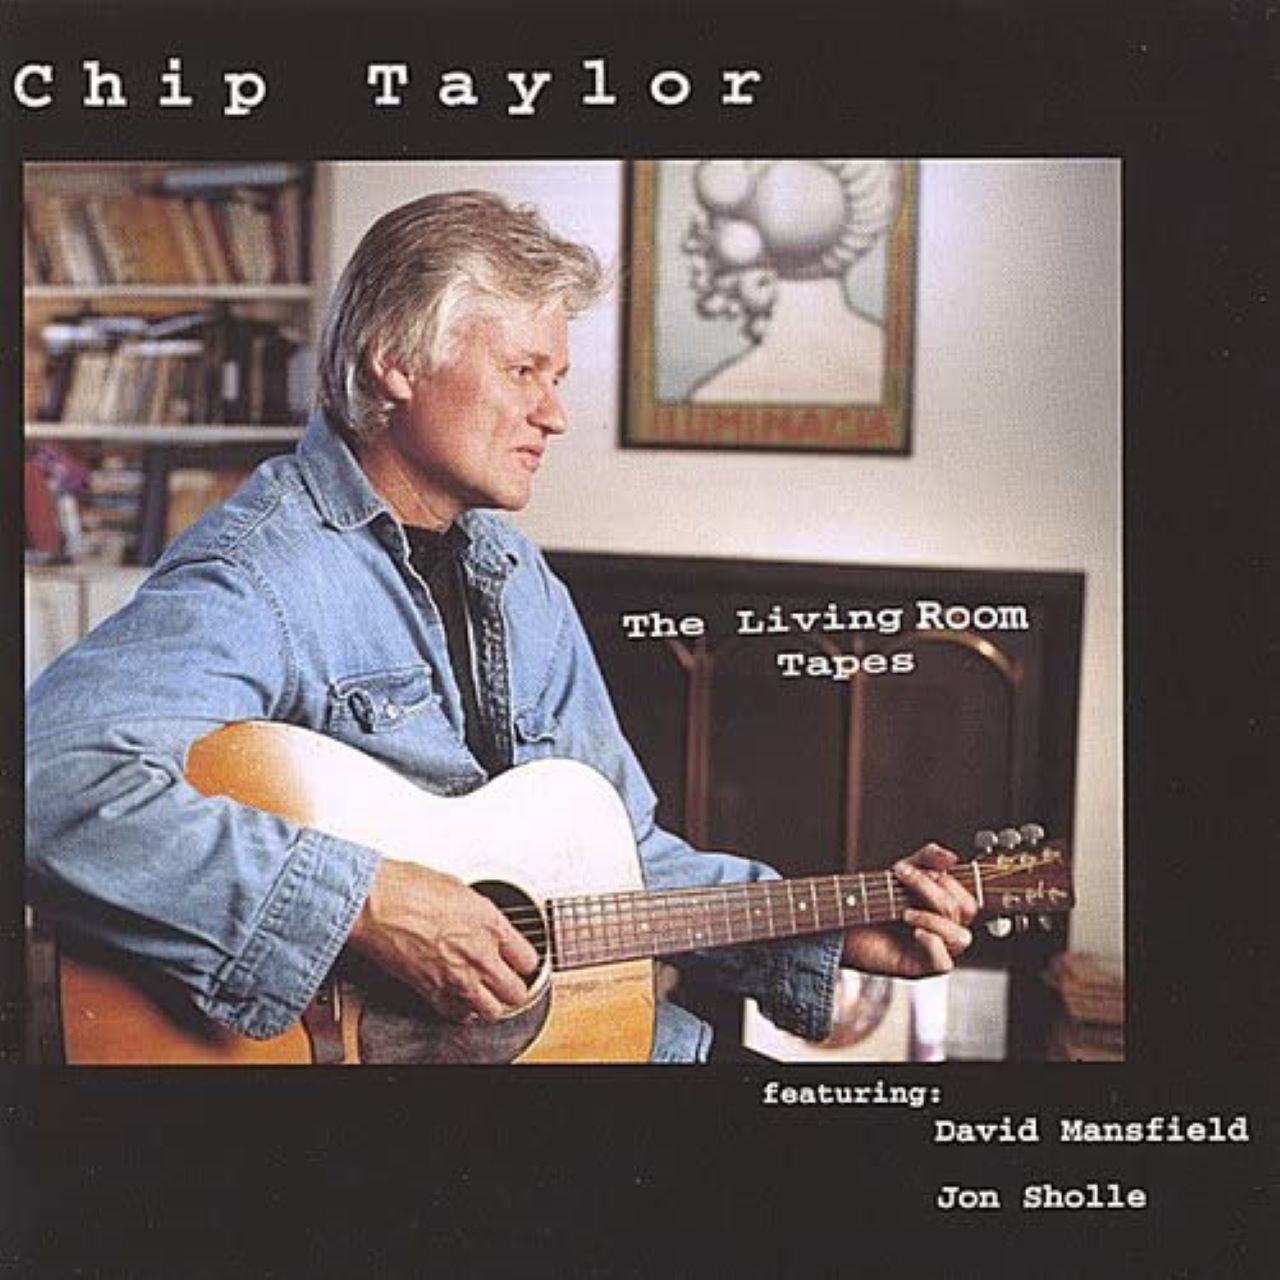 Chip Taylor - The Living Room Tapes cover album